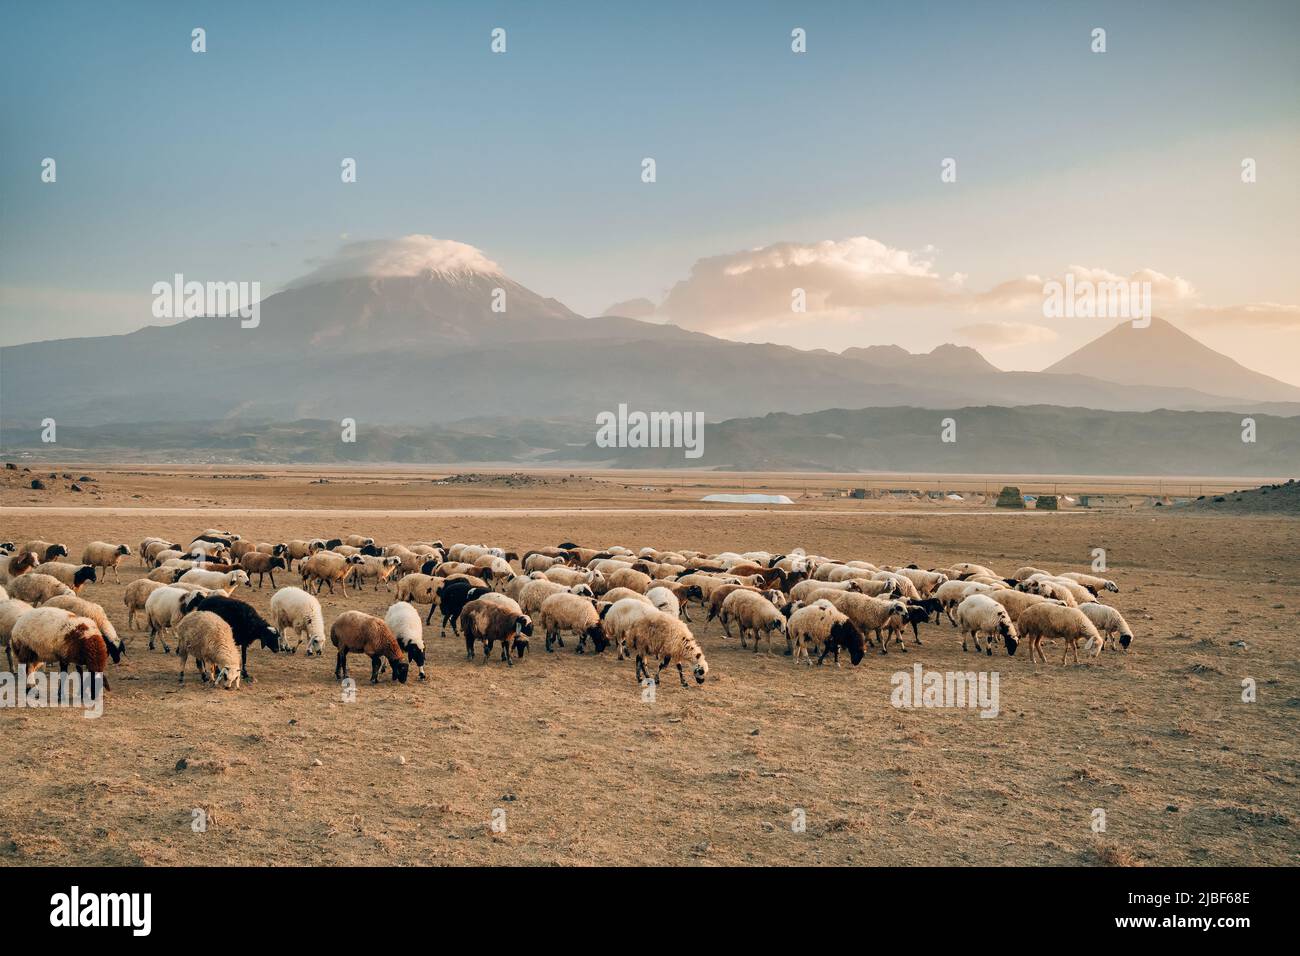 Herd of sheep with the two peaks of the Mount Ararat on the background, Turkey Stock Photo